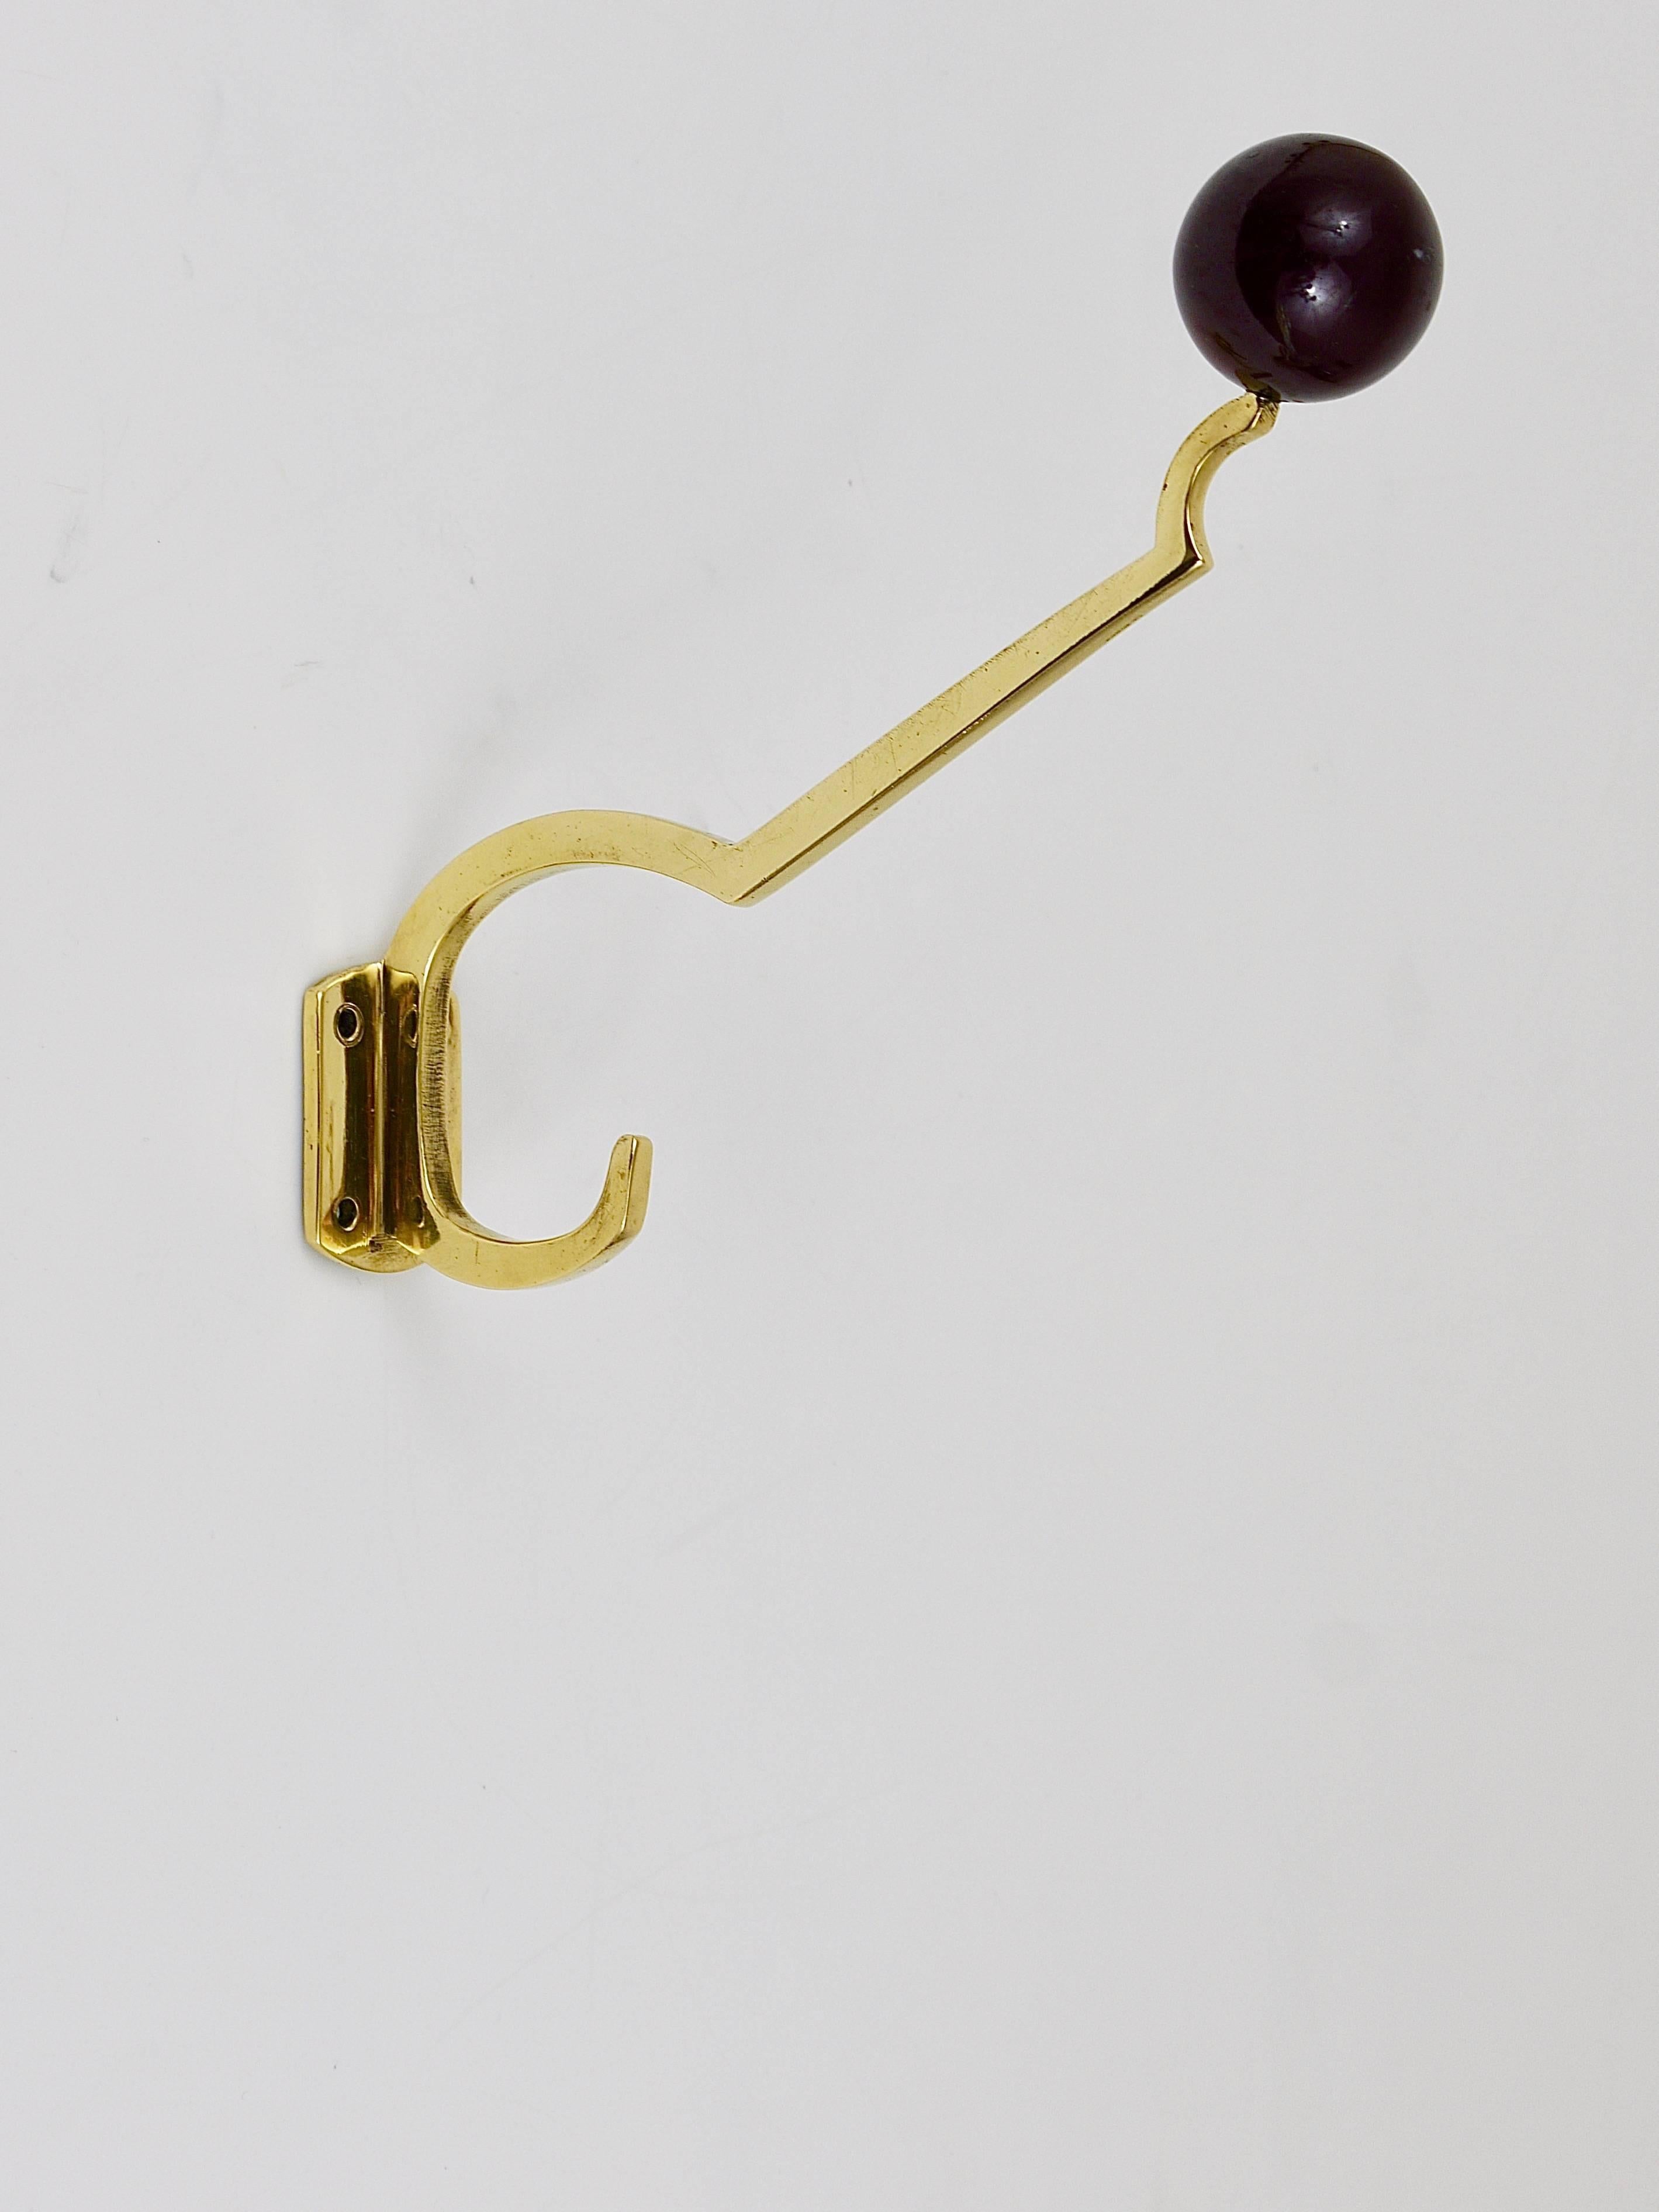 Up to three beautiful wall coat hooks, handmade of solid brass with nice bakelite balls on their top, dated around 1910-1920, made in Vienna, Austria. Gently polished by hand, in good condition with nice patina. Three hooks are available, sold and